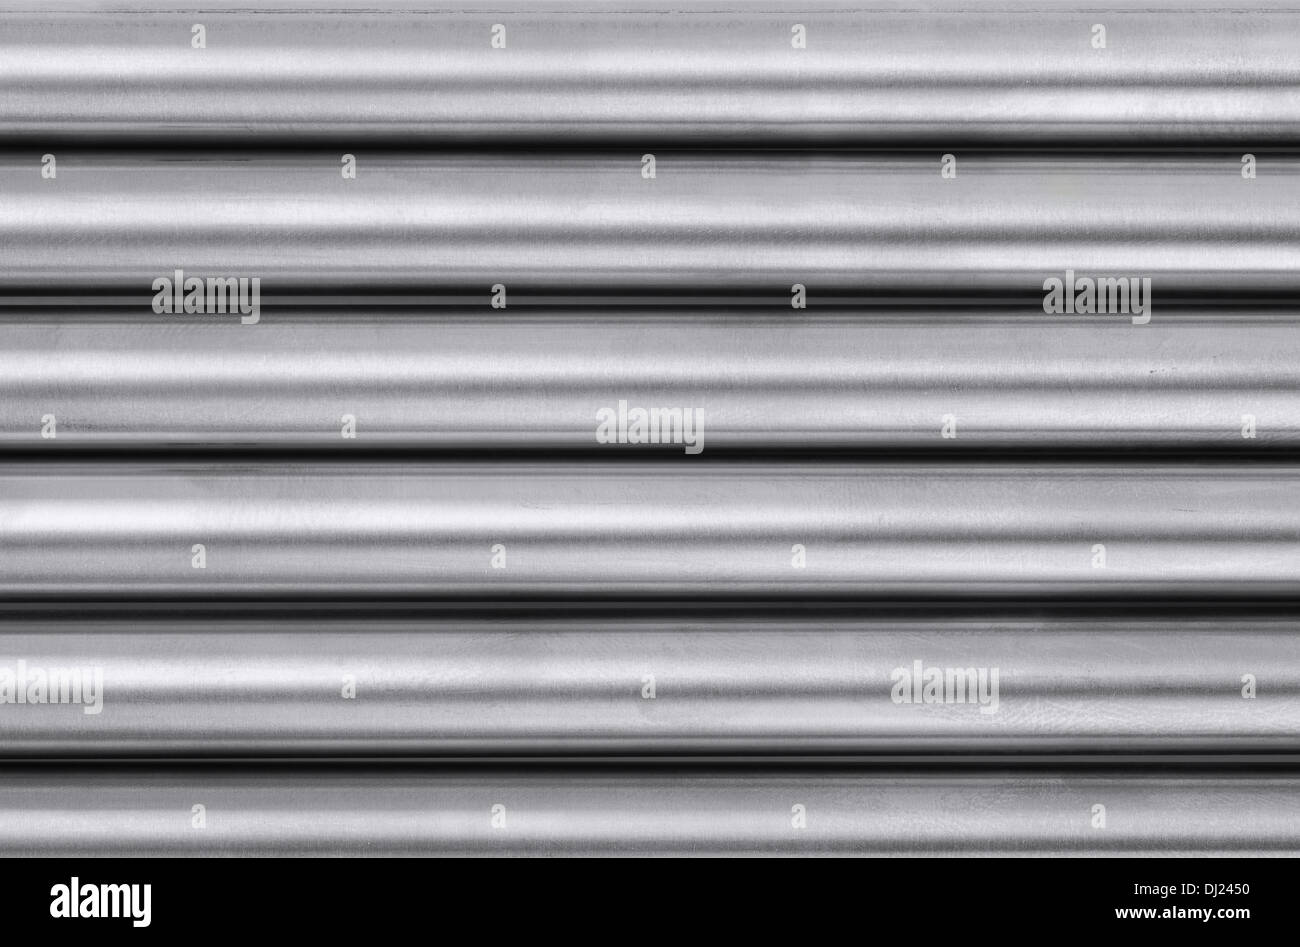 Shiny steel pipes background Stock Photo